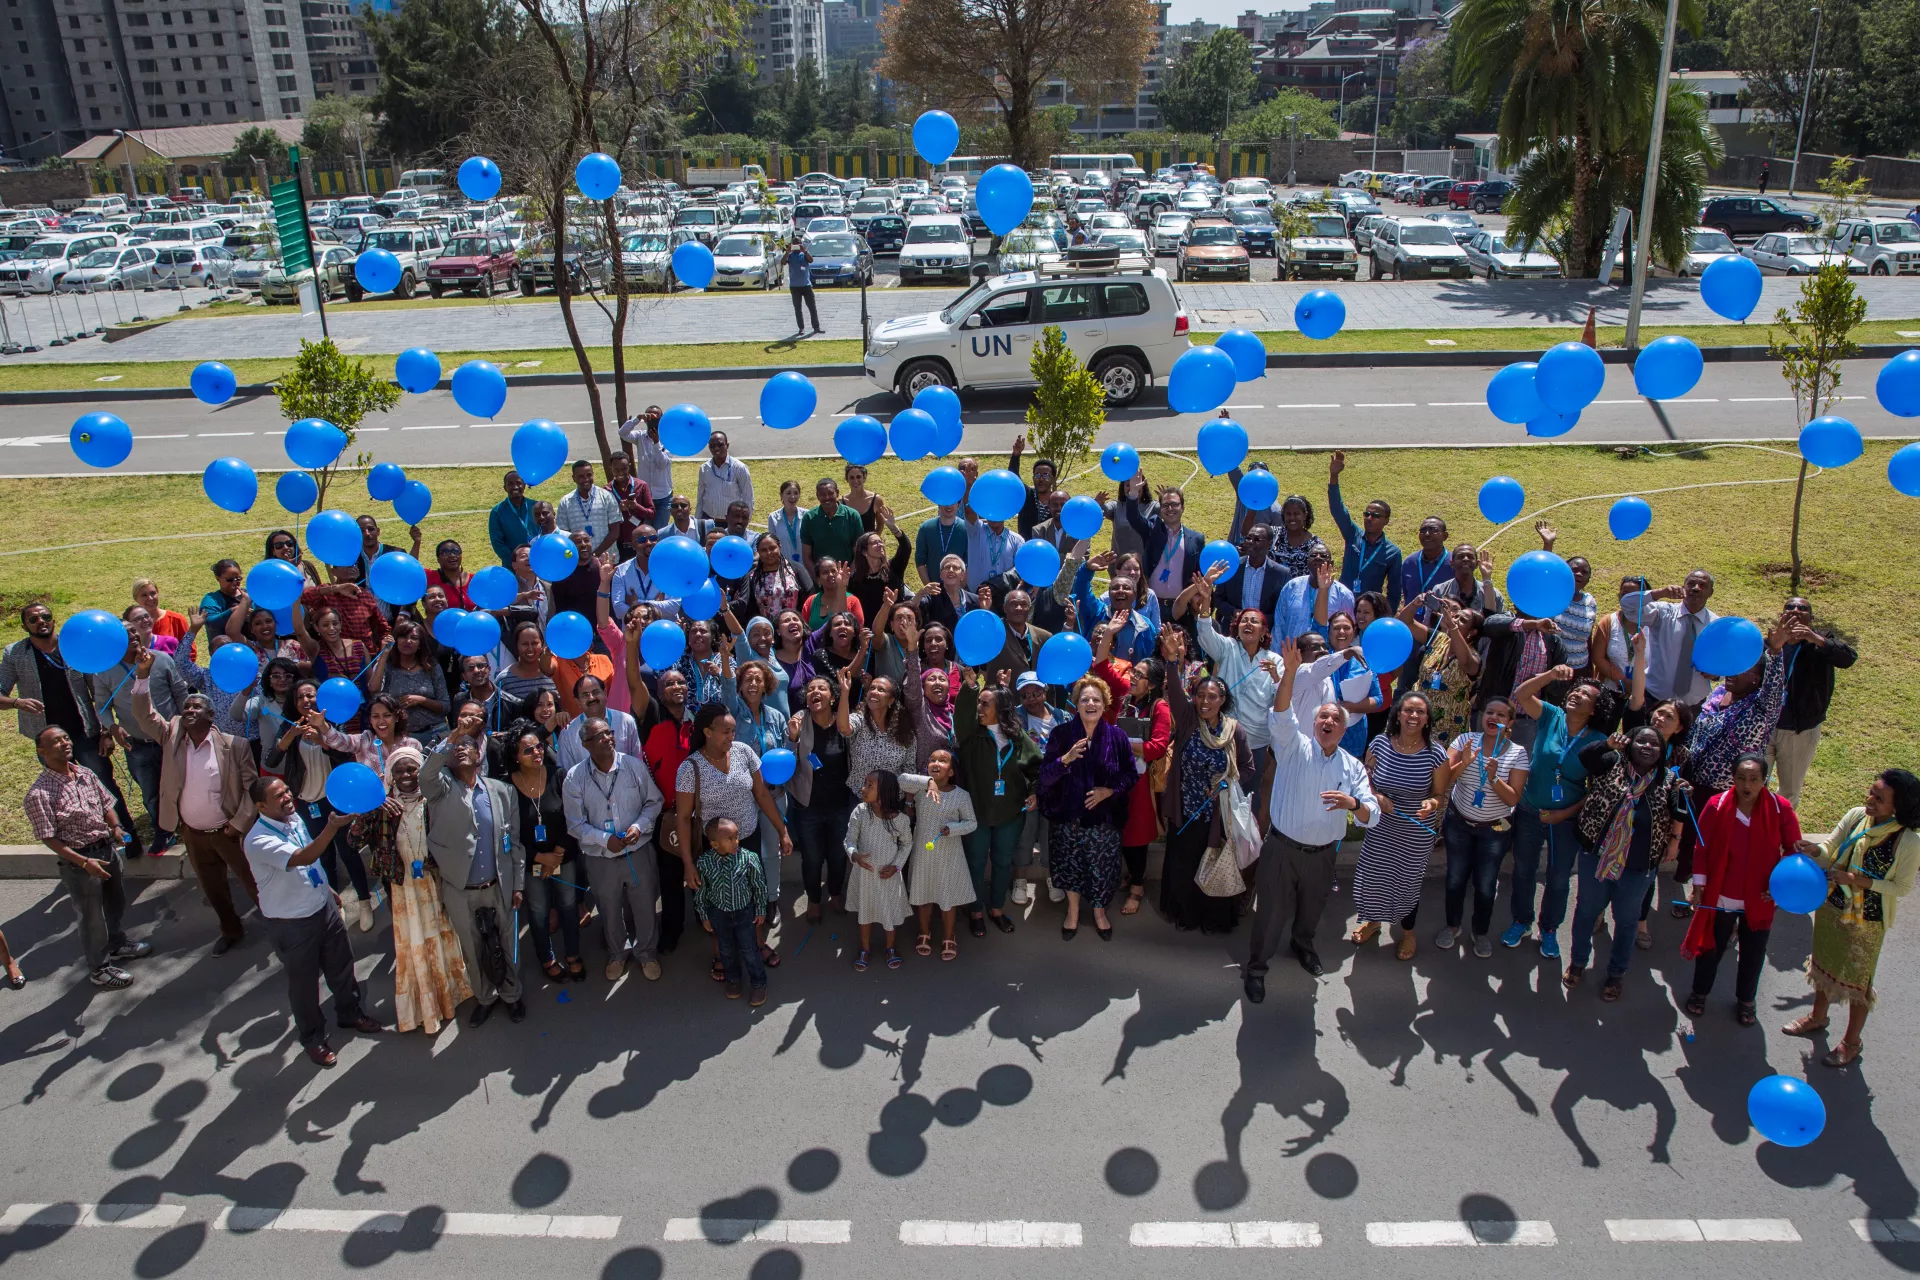 UNICEF Ethiopia staff released 70 balloons to commemorate UNICEF's global 70 years anniversary and made a wish that the coming years ahead will bring better results for every child everywhere. UNICEF Ethiopia2016Demissew Bizuwork